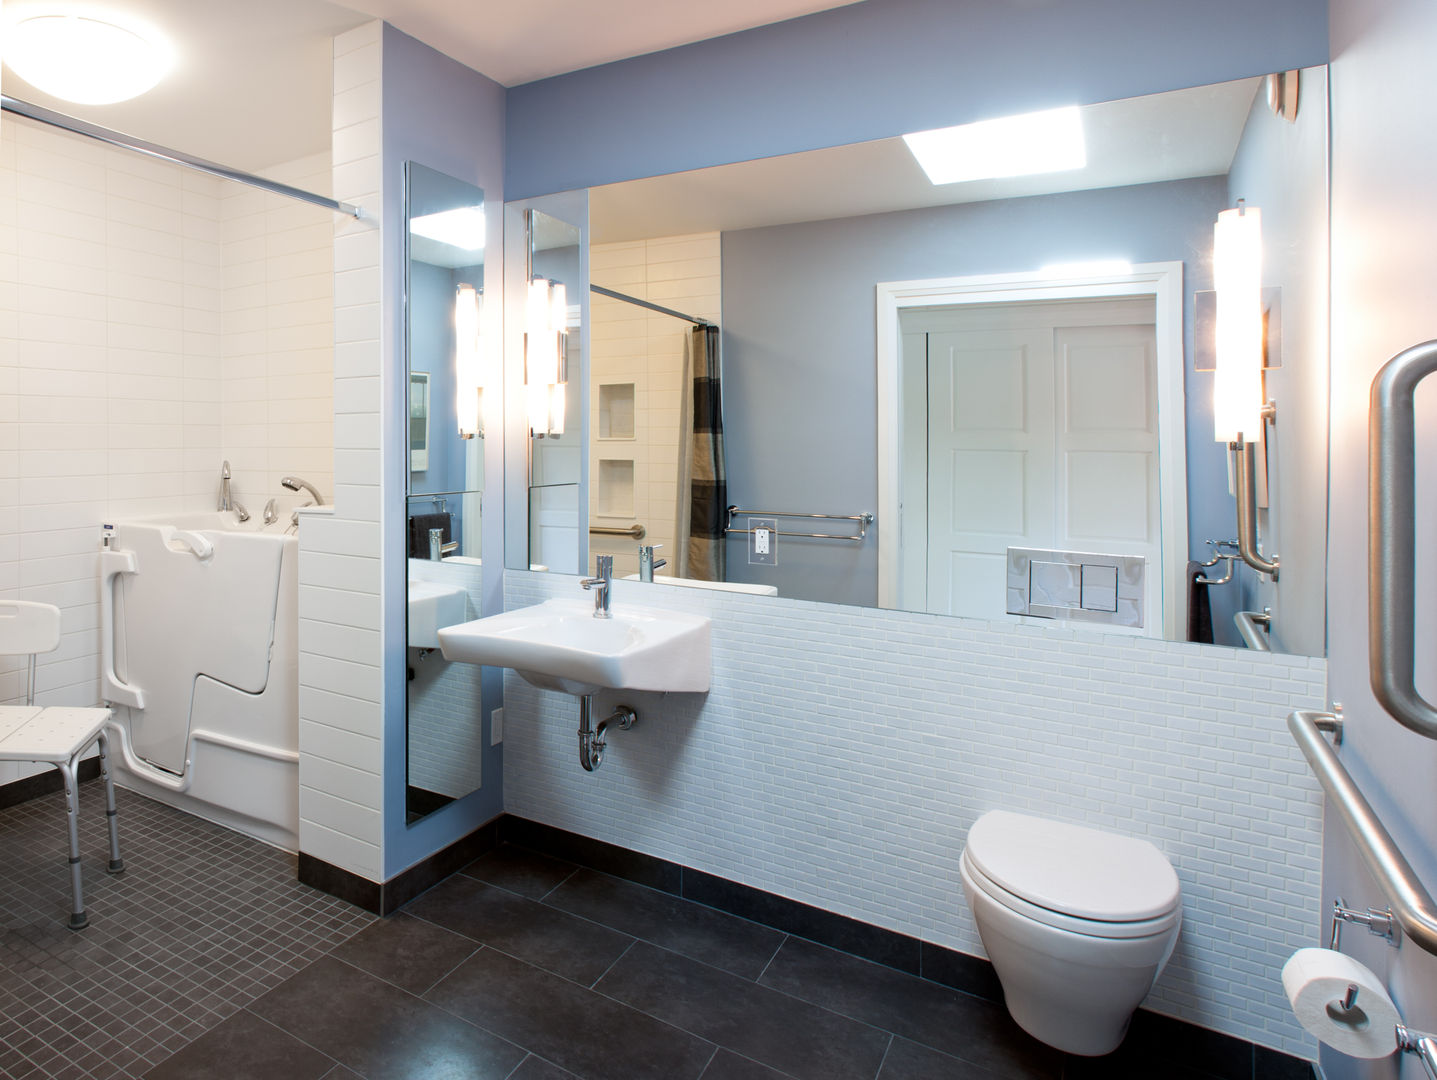 Roncesvalles Accessible House, Solares Architecture Solares Architecture Modern style bathrooms